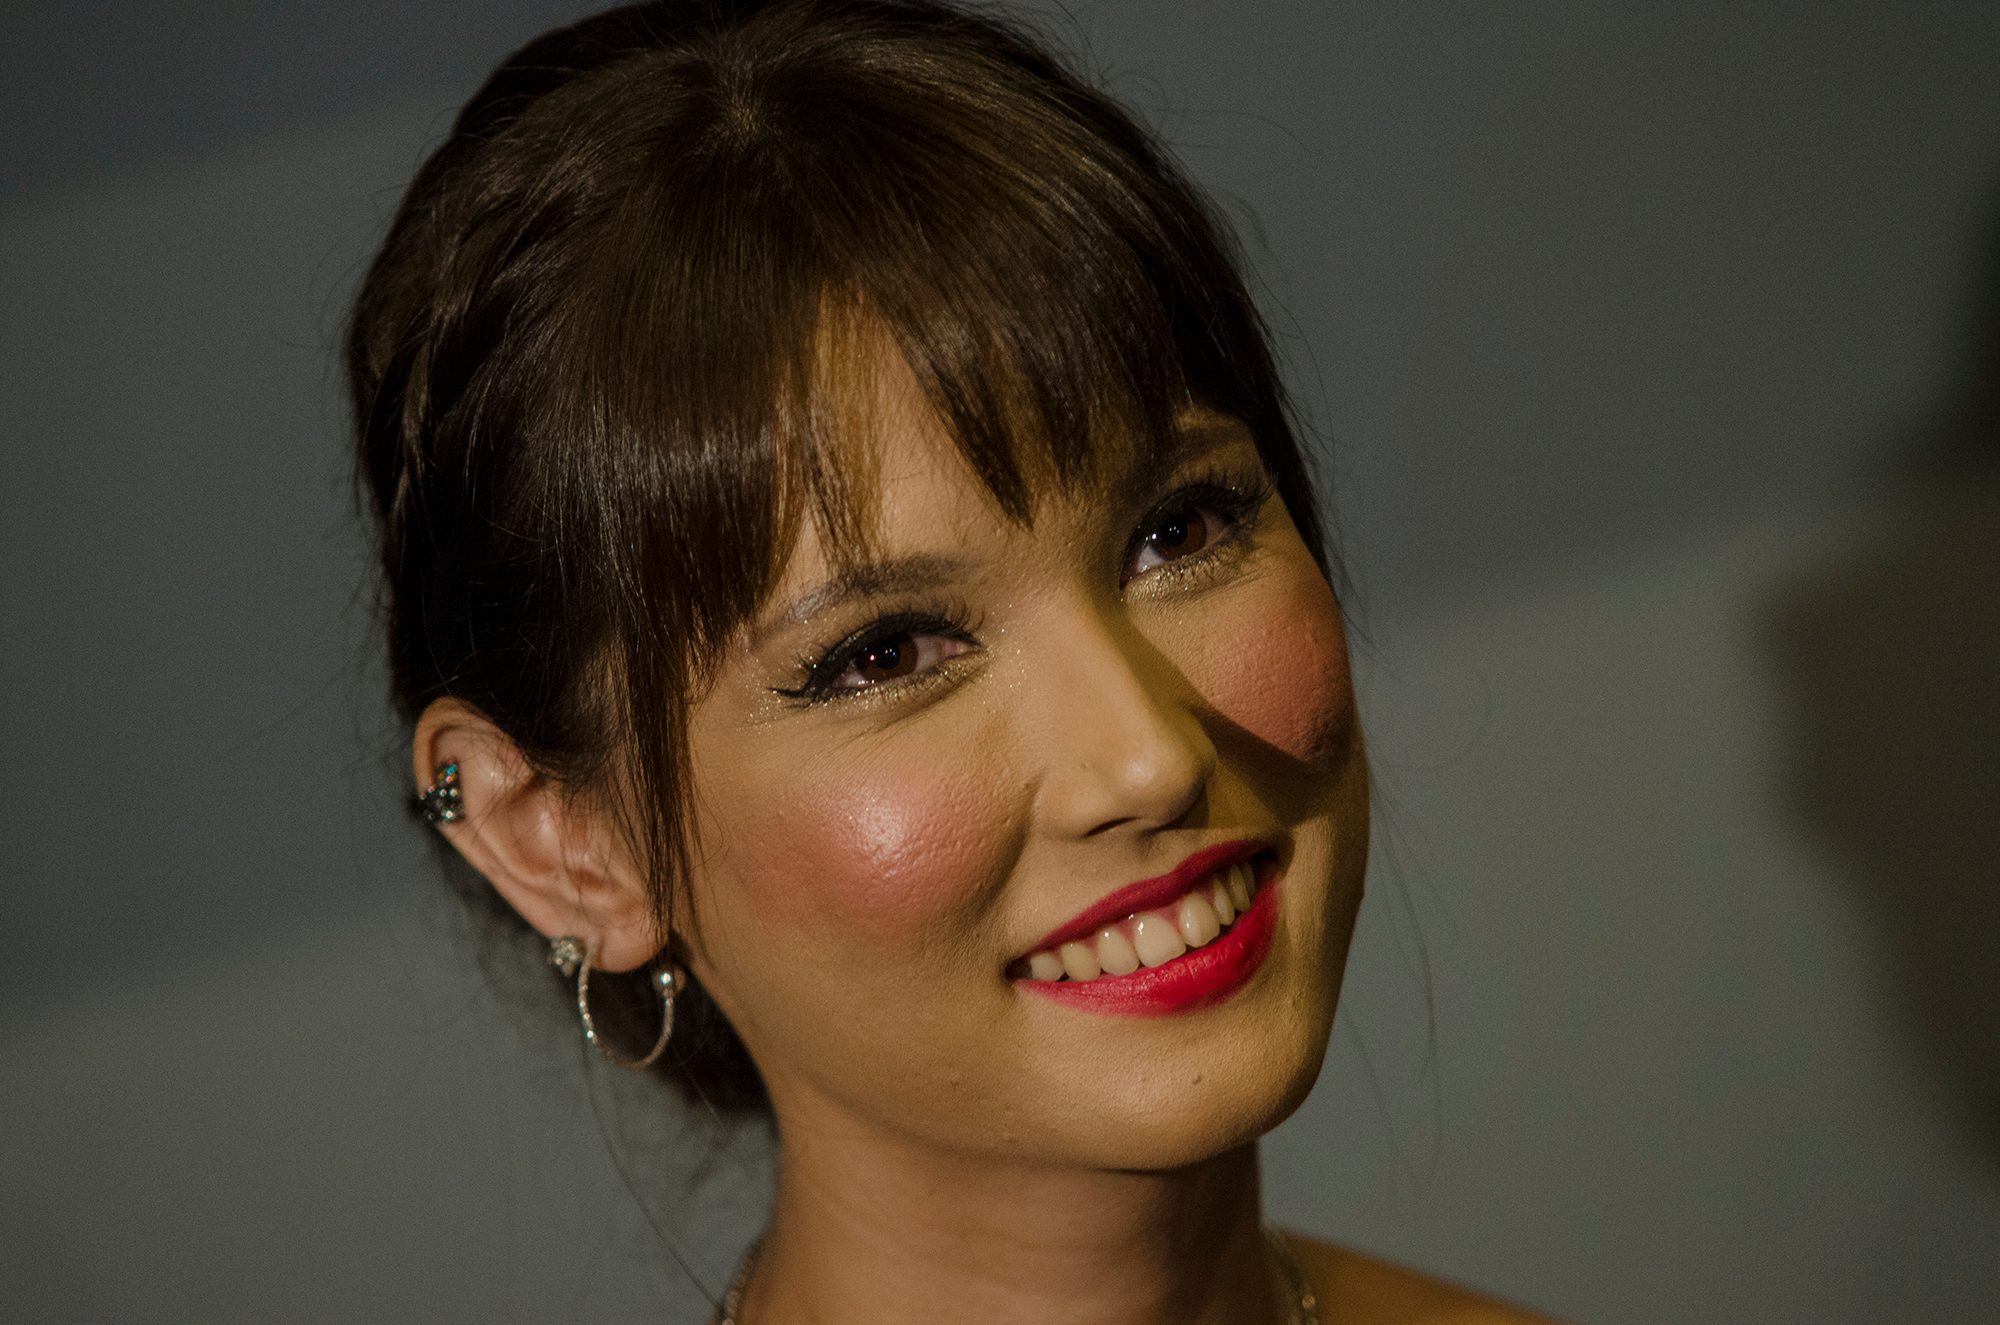 Maria Ozawa on adult films: ‘I quit the industry 100%’